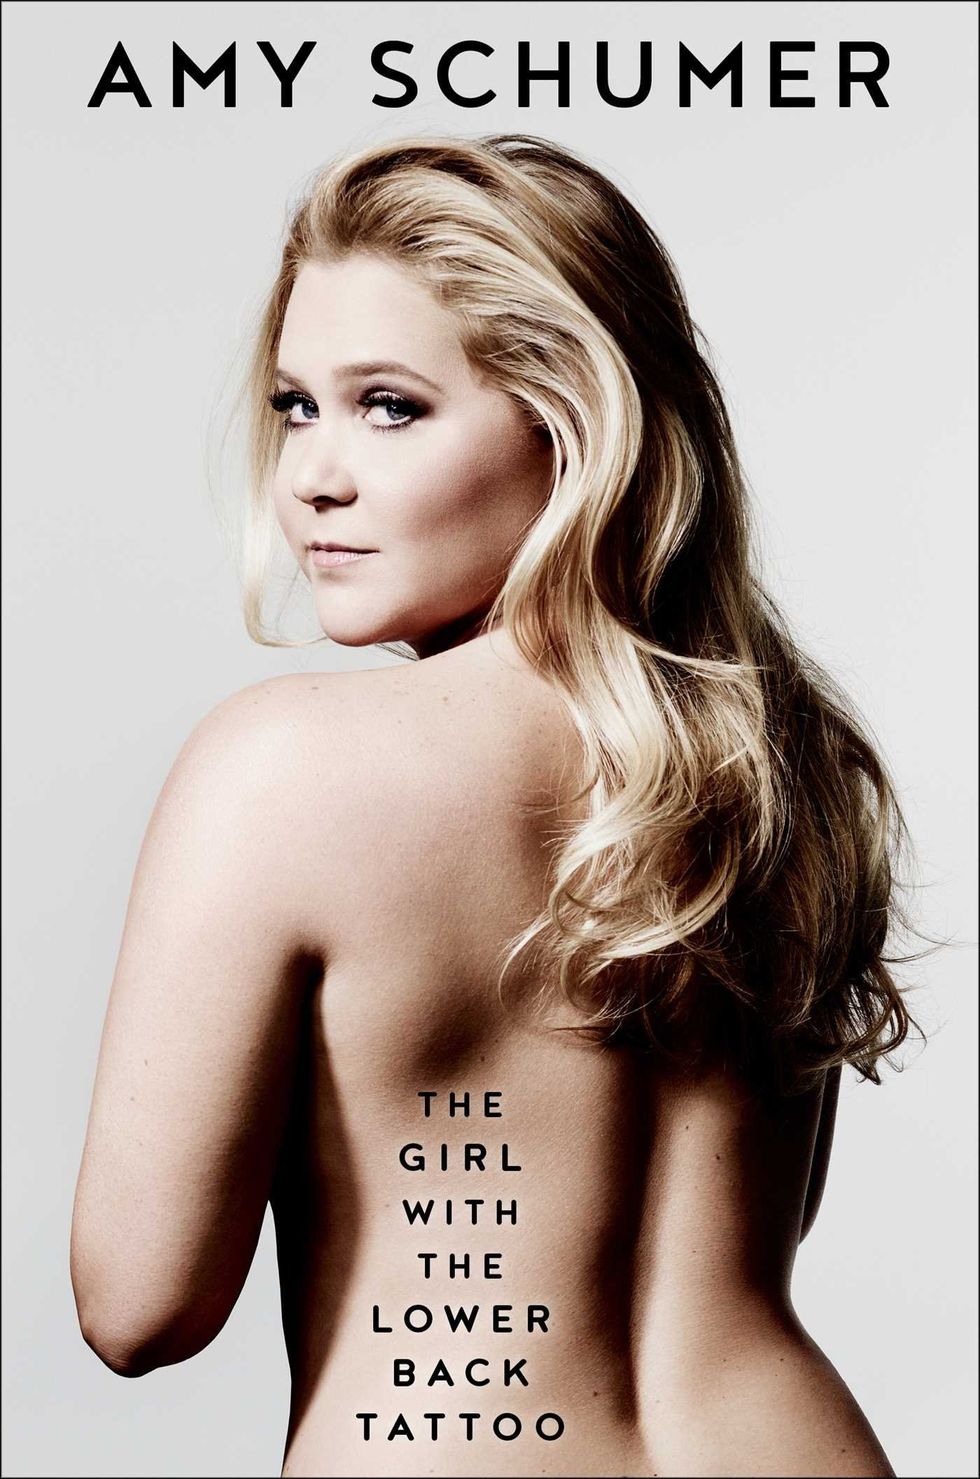 Amy Schumer Lesbian Nude - 10 Facts About Amy Schumer's Book - Surprising Reveals From Girl With the  Lower Back Tattoo